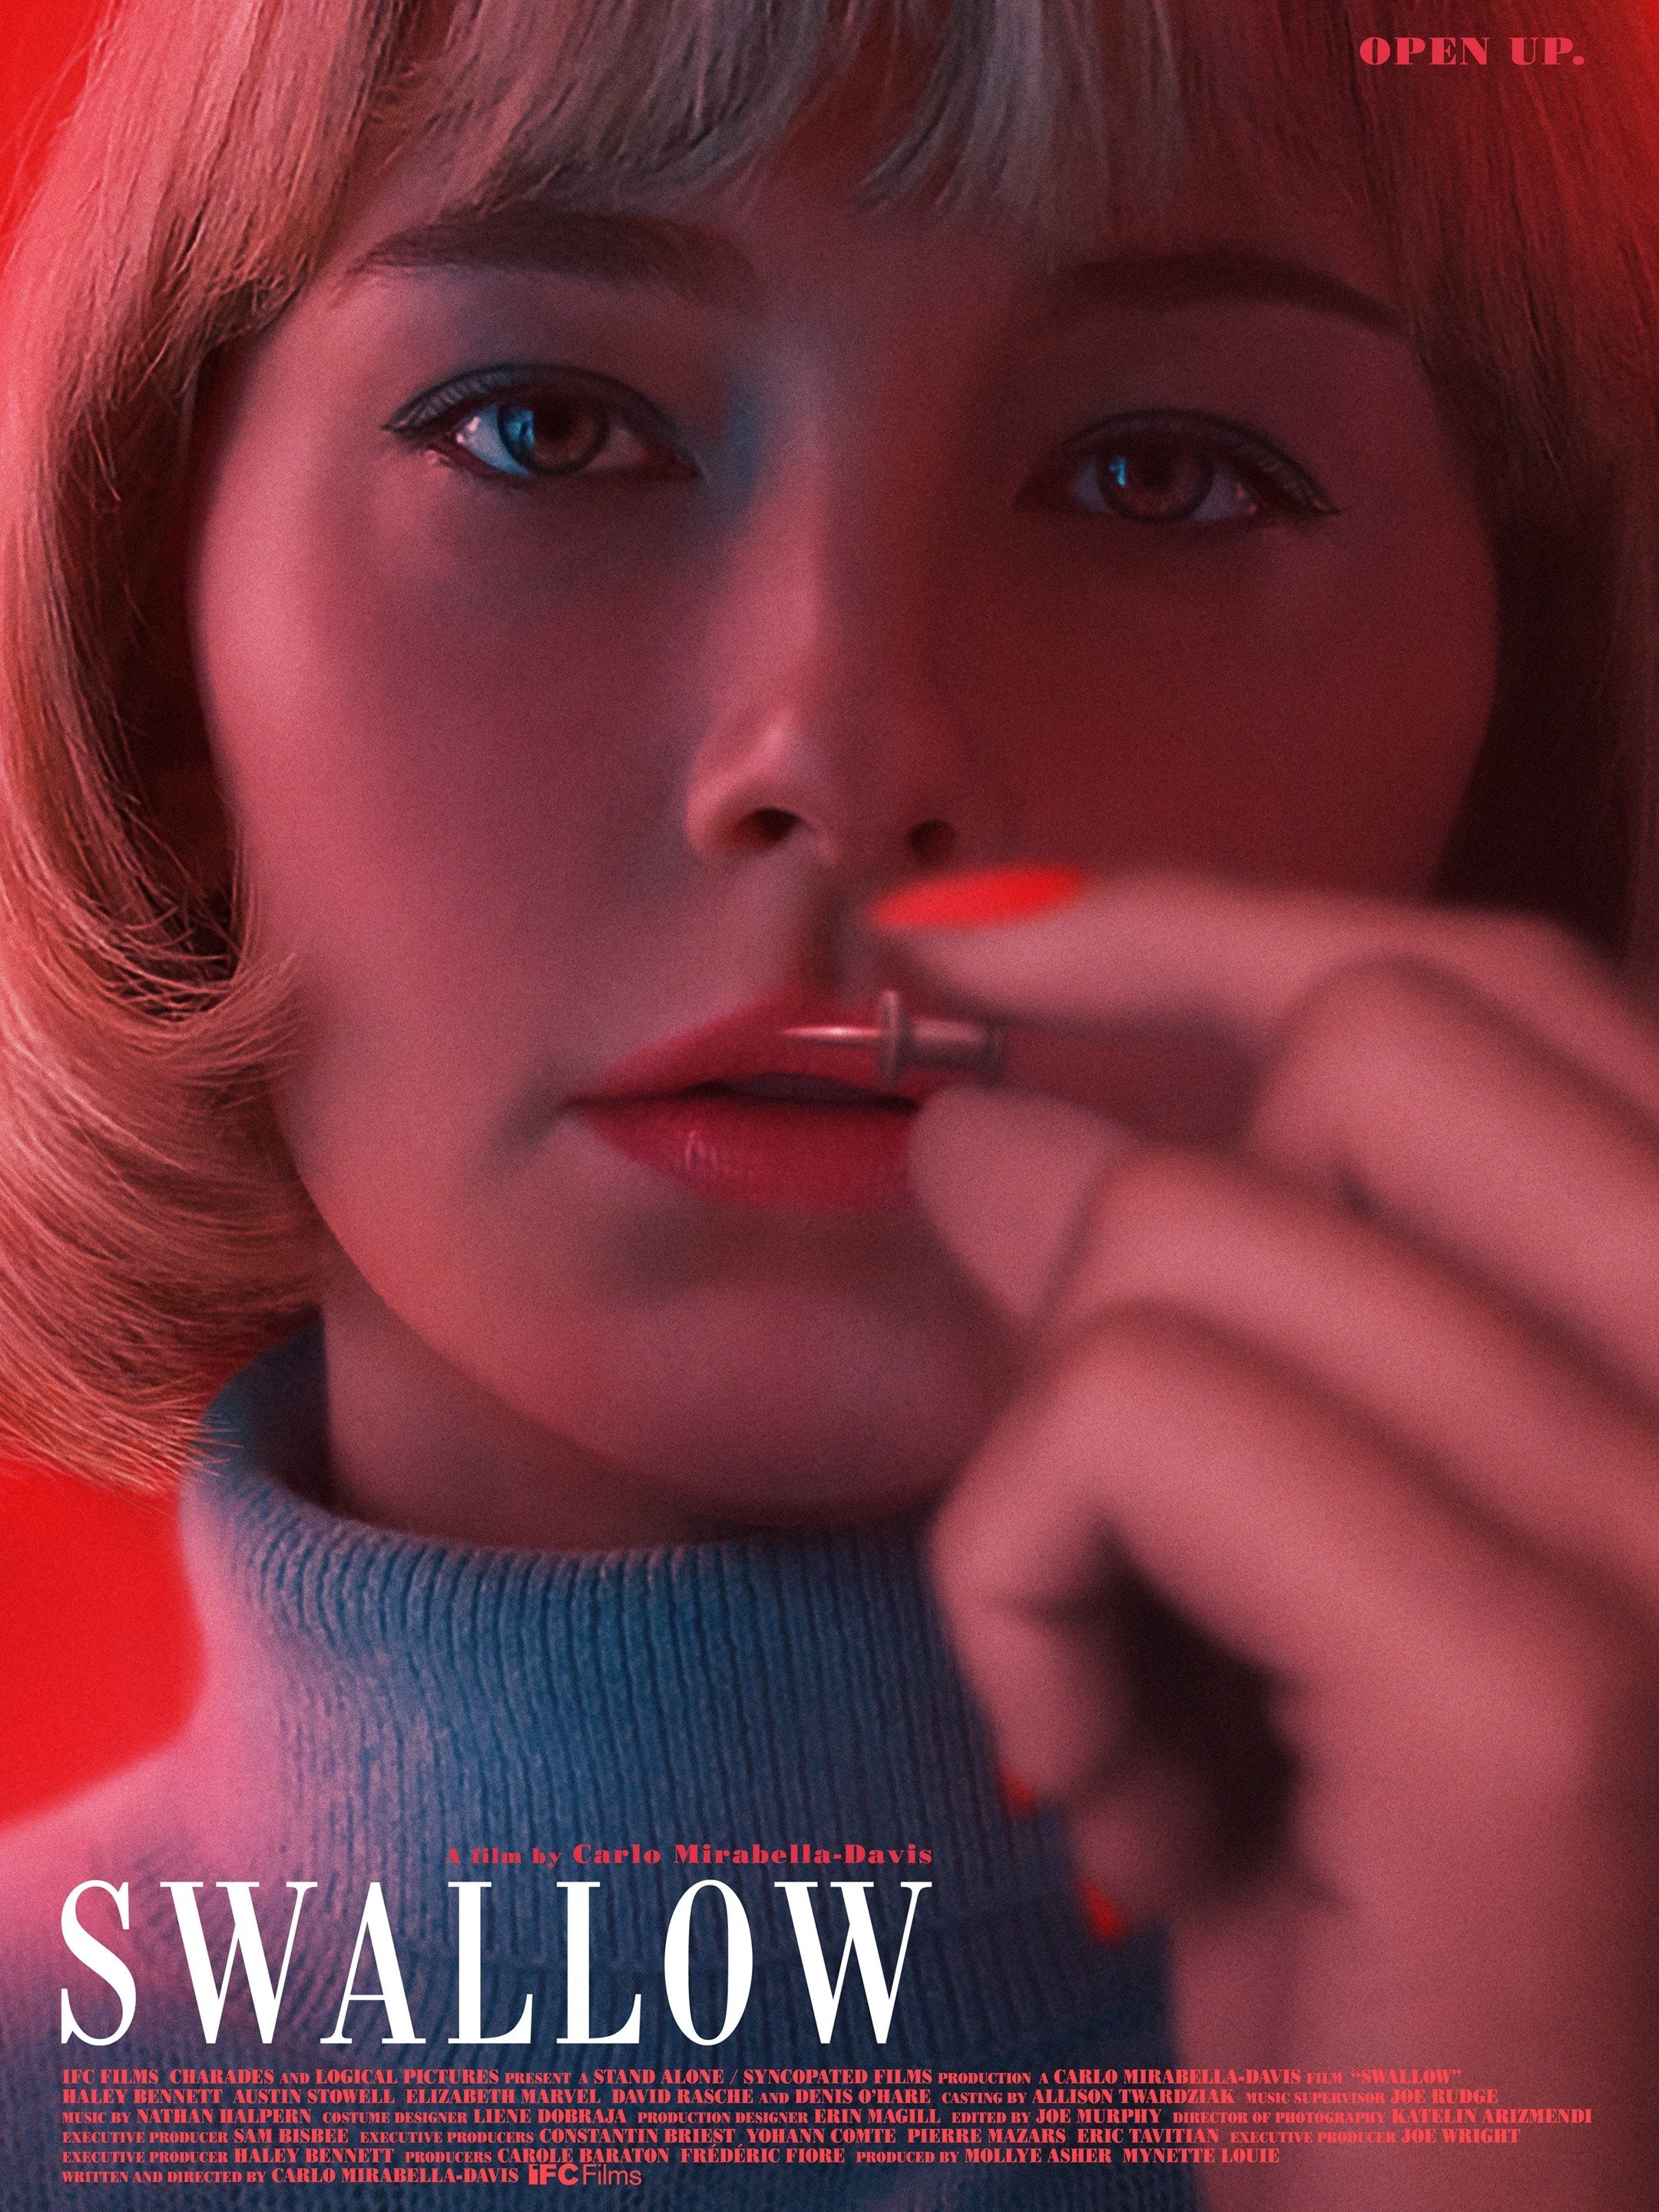 adriano alves recommends Girls Who Like To Swallow